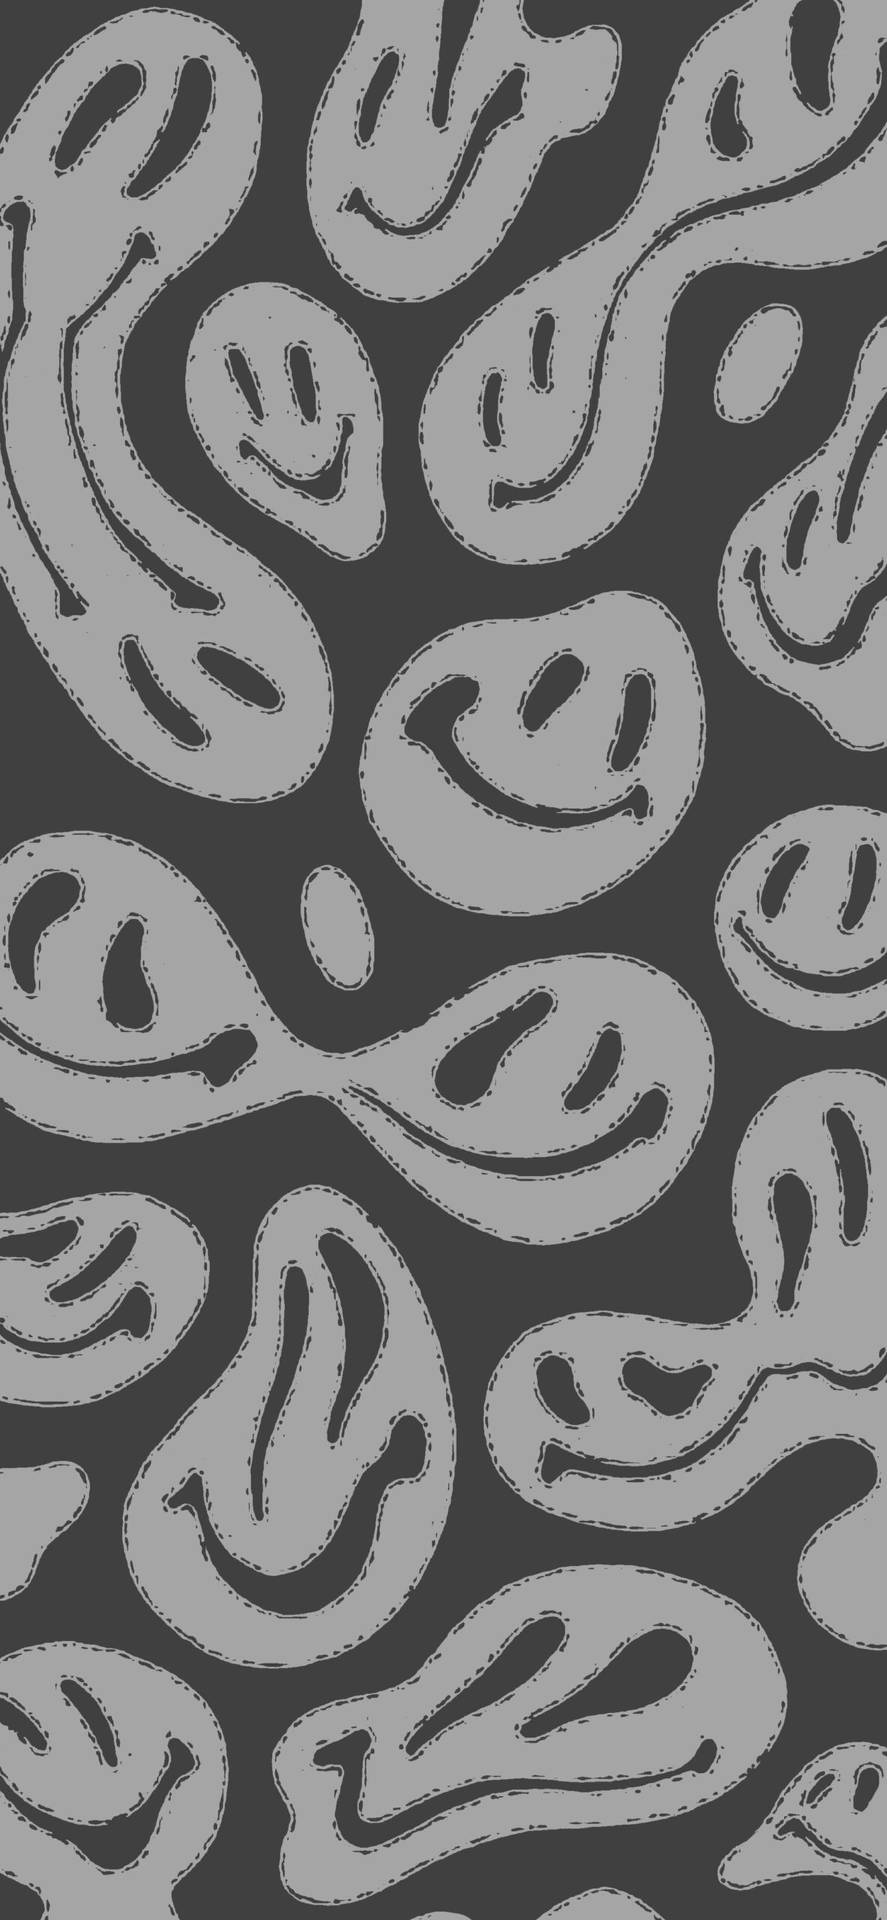 Grayscale Distorted Smiley Trippy Aesthetic Background